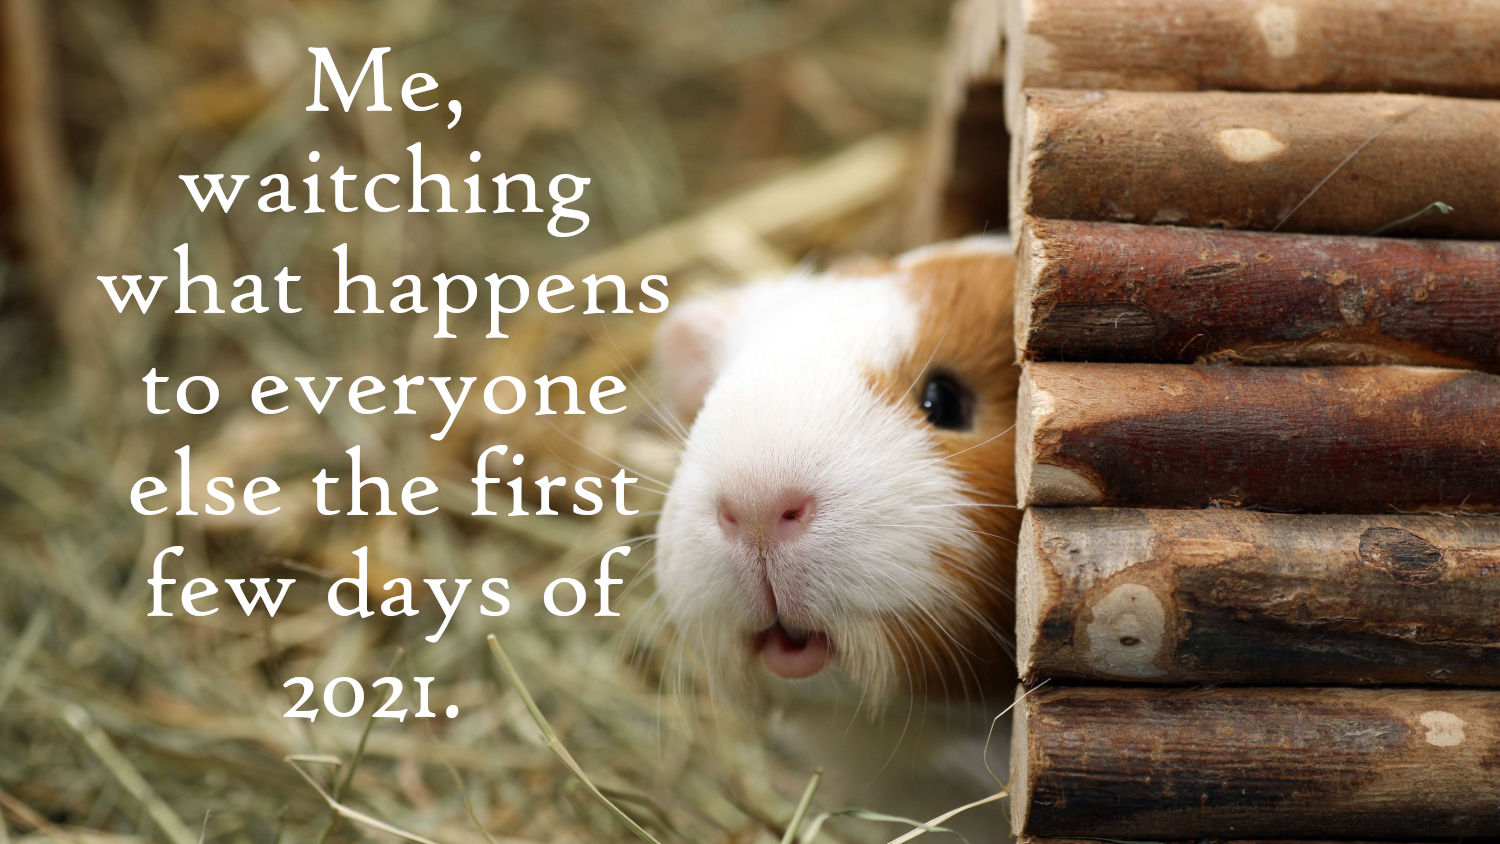 do guinea pigs hide - Me, waitching what happens to everyone else the first few days of . 2021.